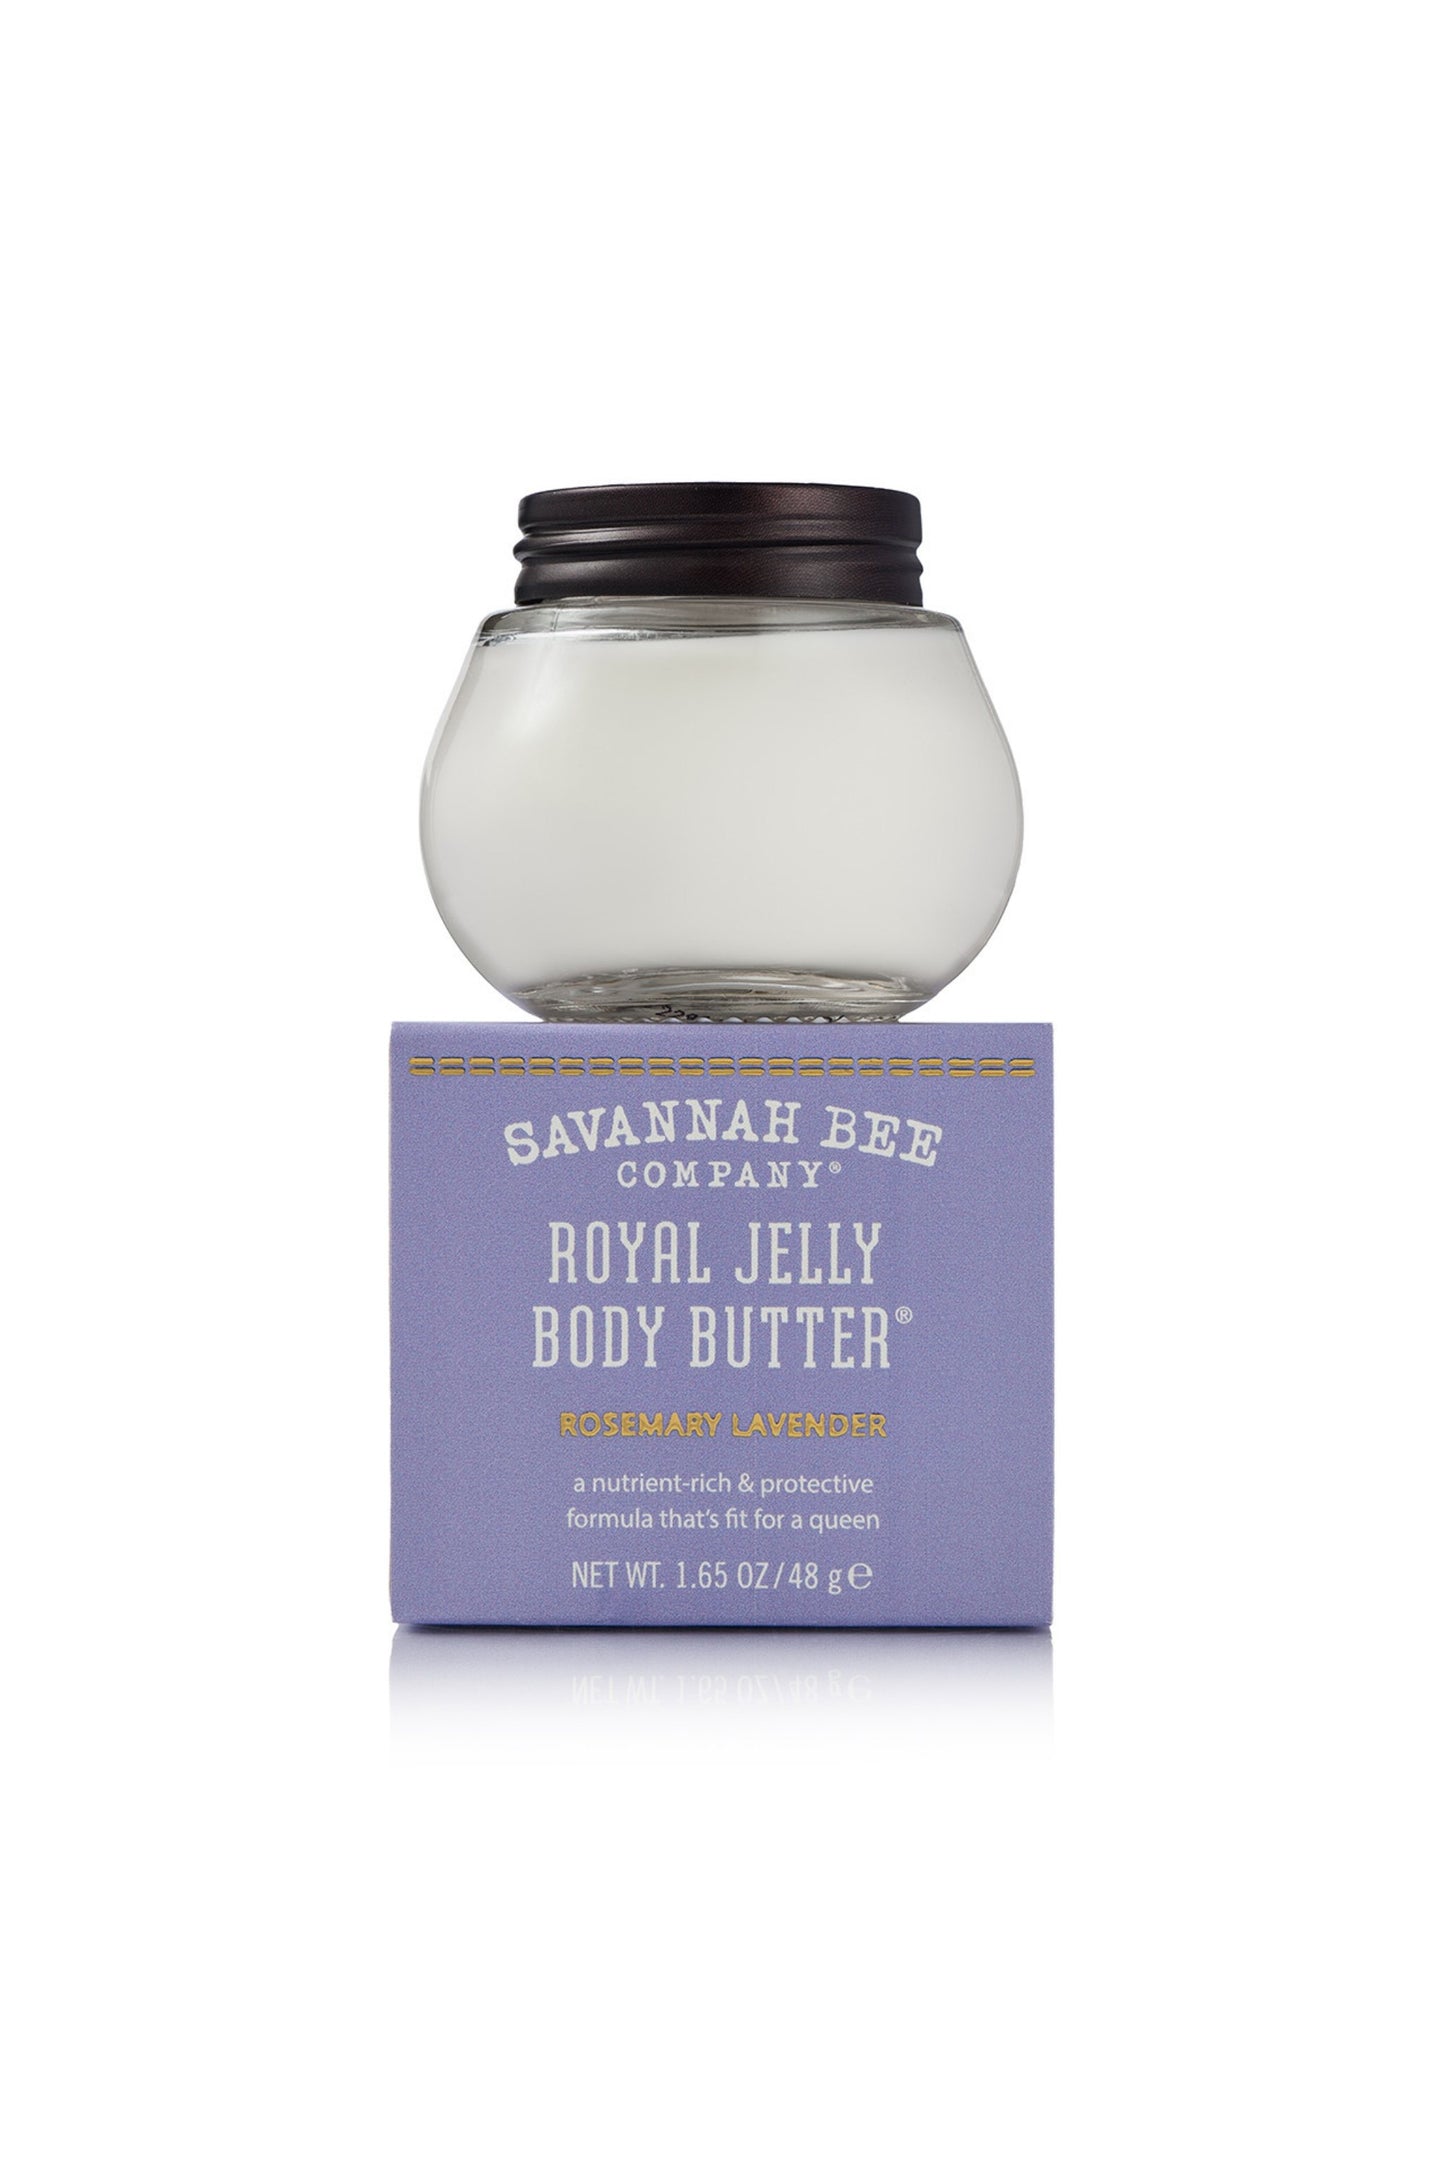 Royal Jelly Body Butter Rosemary Lavender in a 1.65 oz. jar